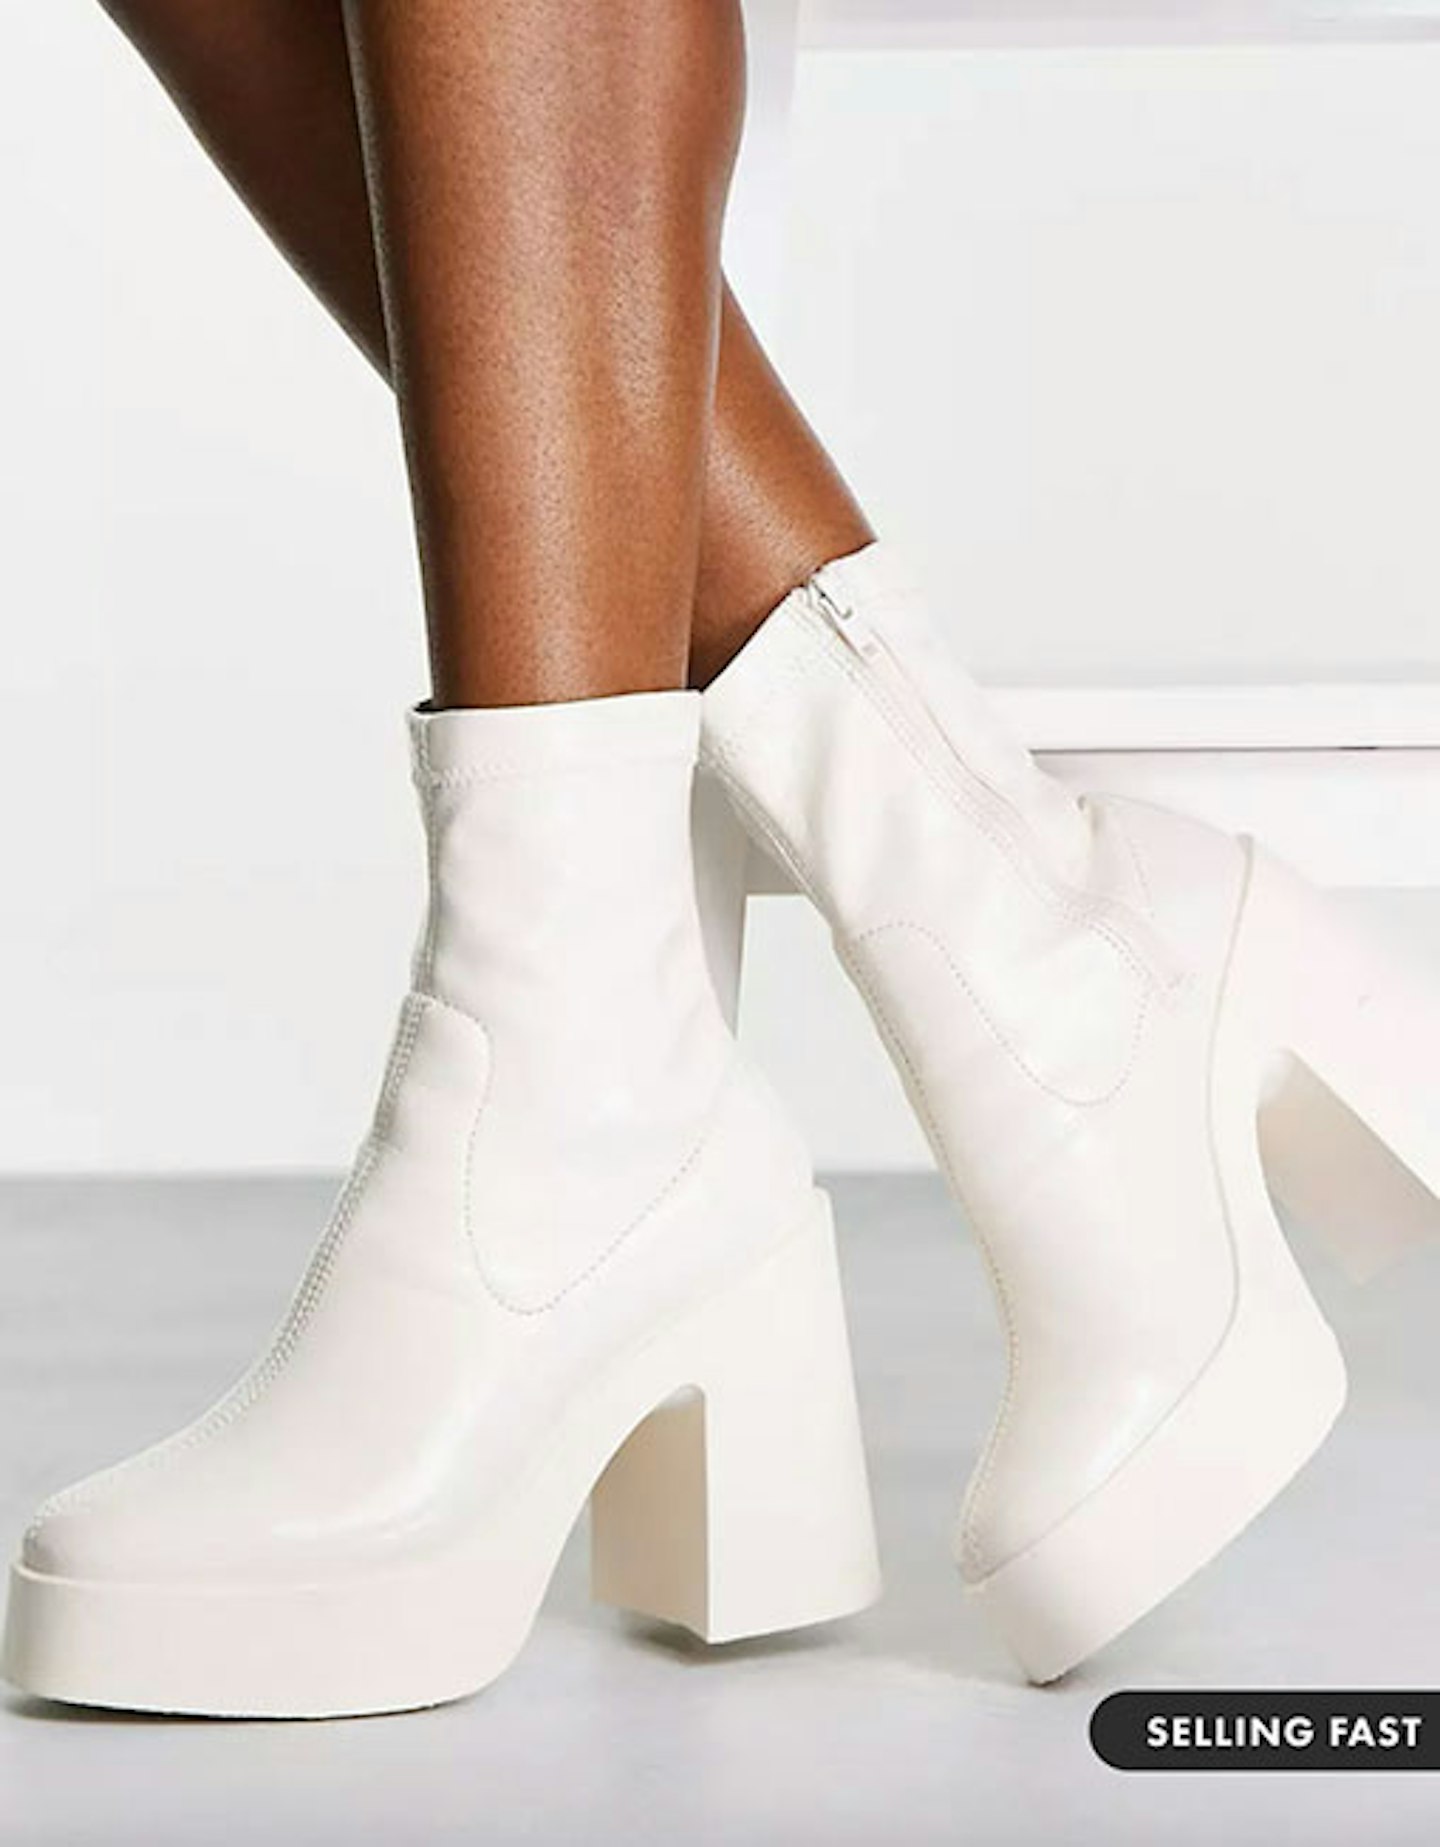 ASOS DESIGN Elsie High Heeled Sock Boots in White Patent